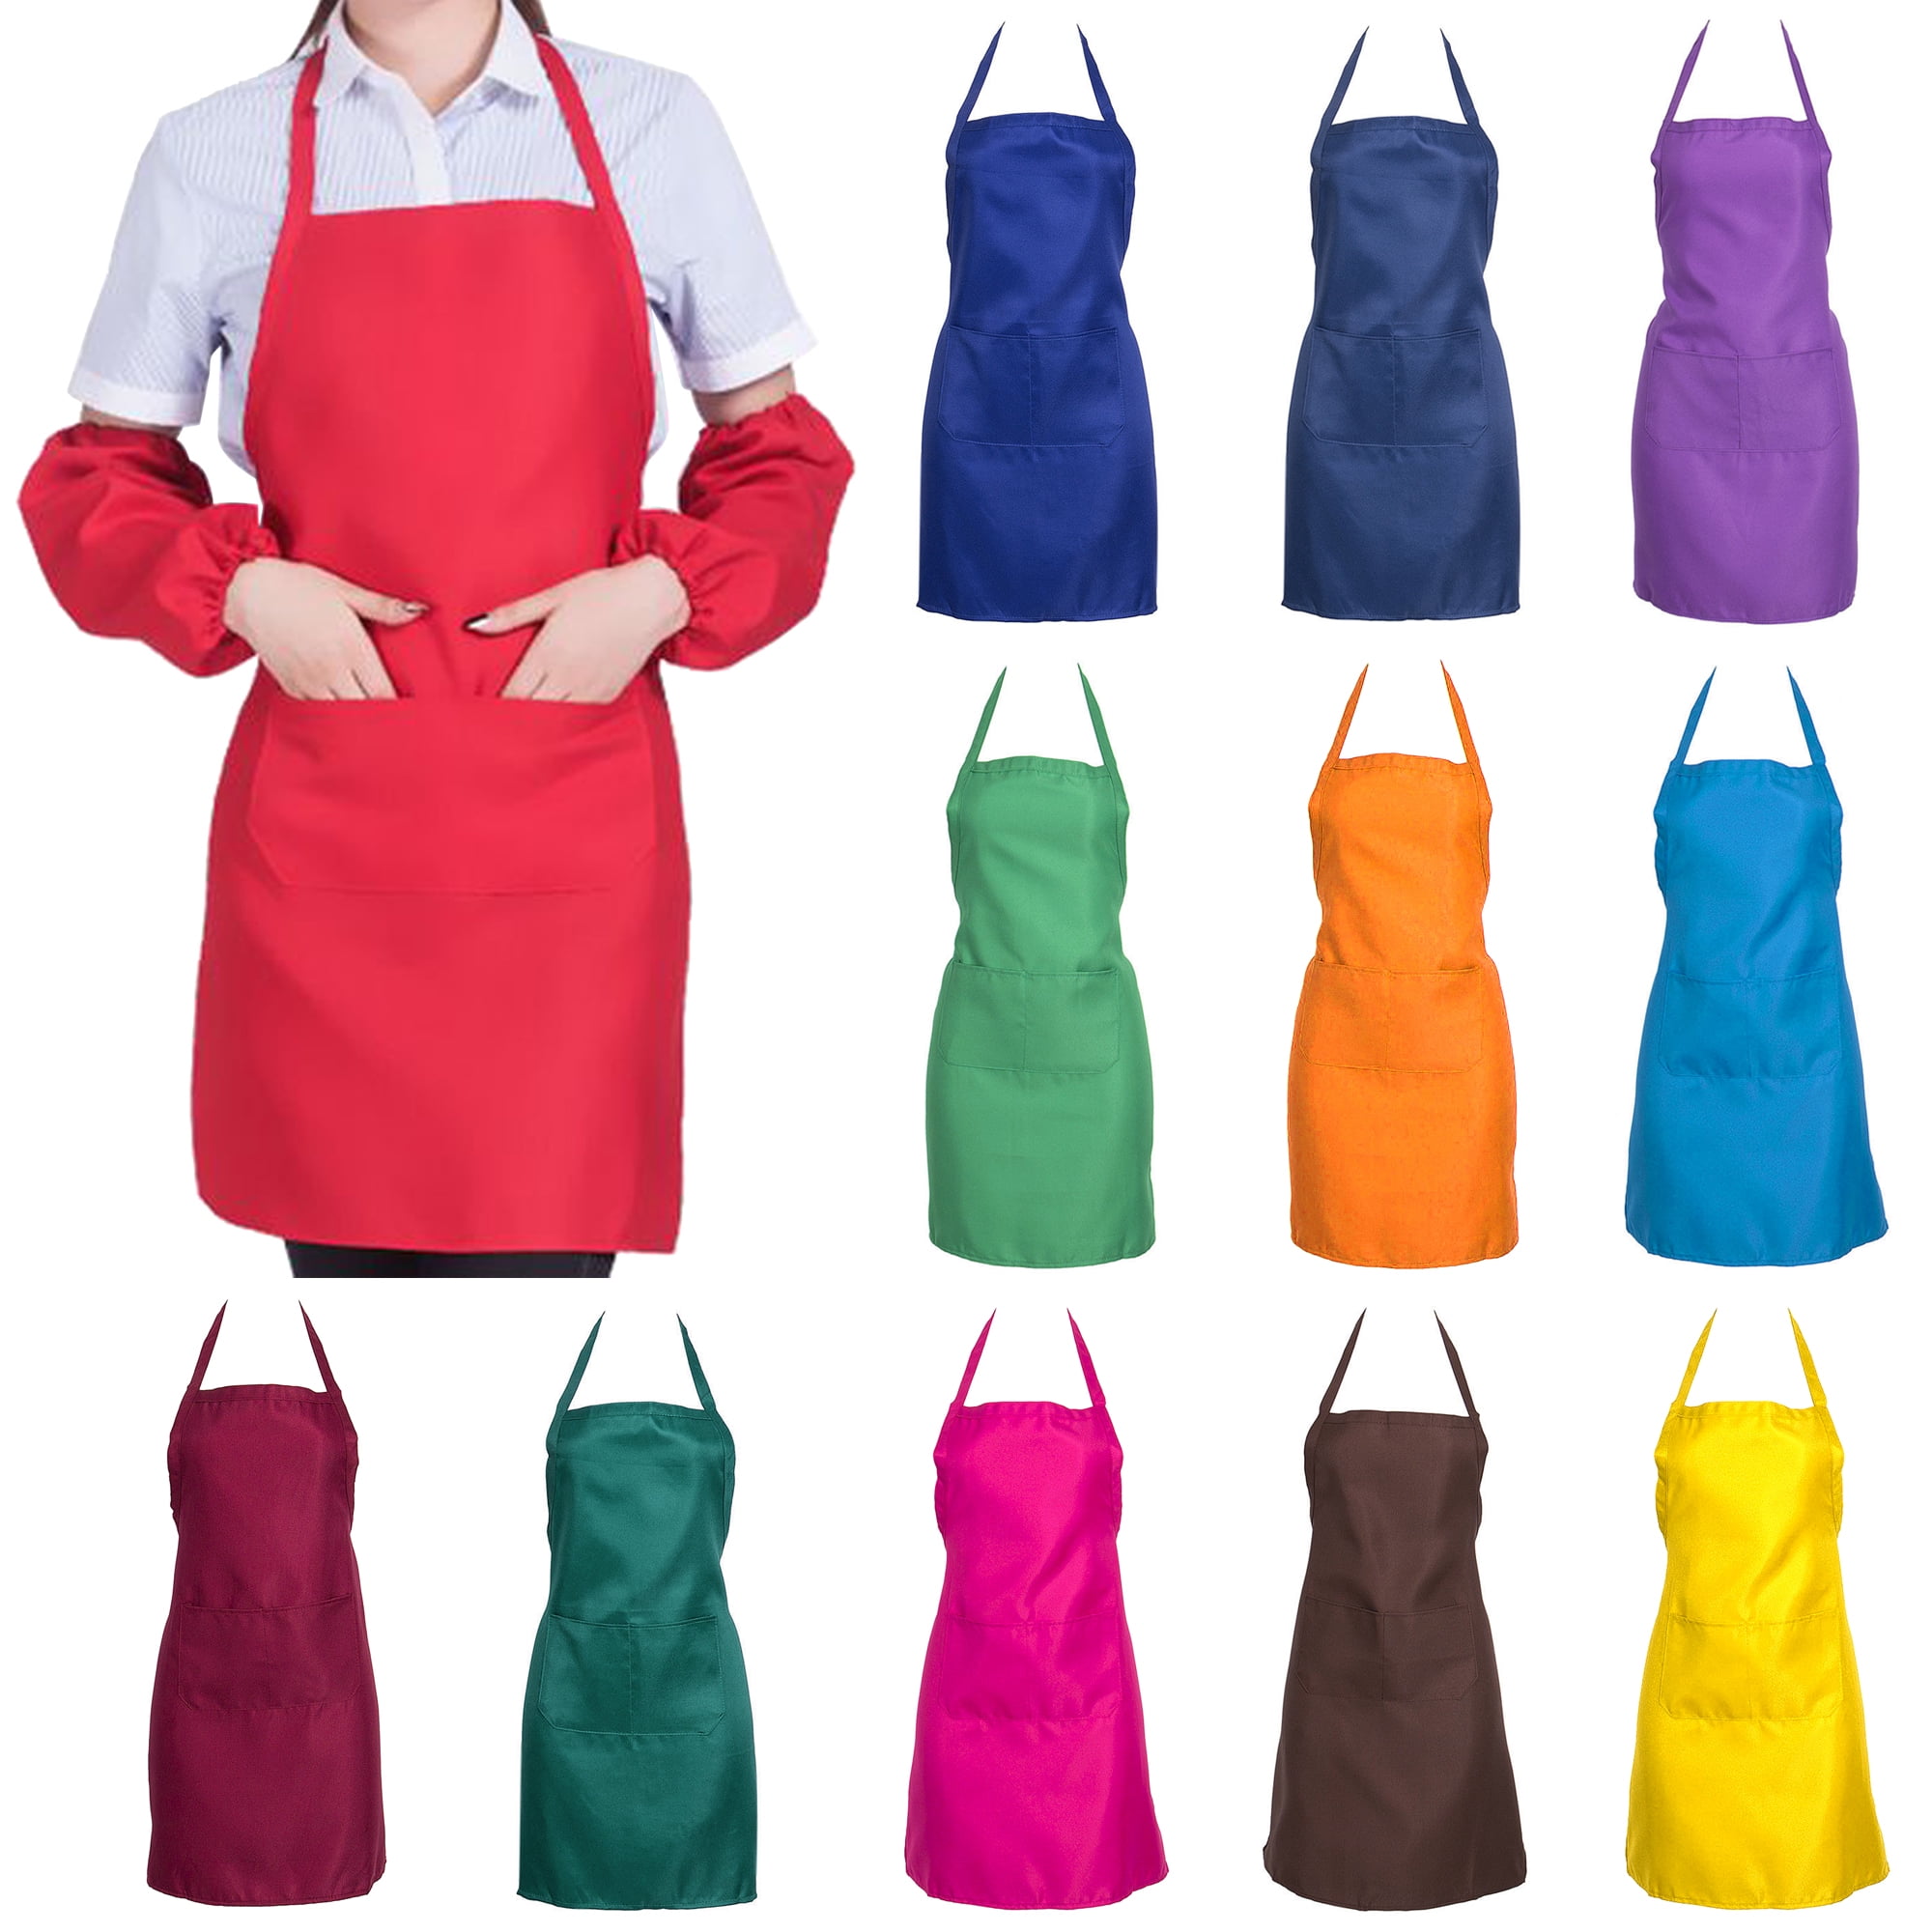 CafePress Never Trust A Skinny Cook Kitchen Apron with Pockets